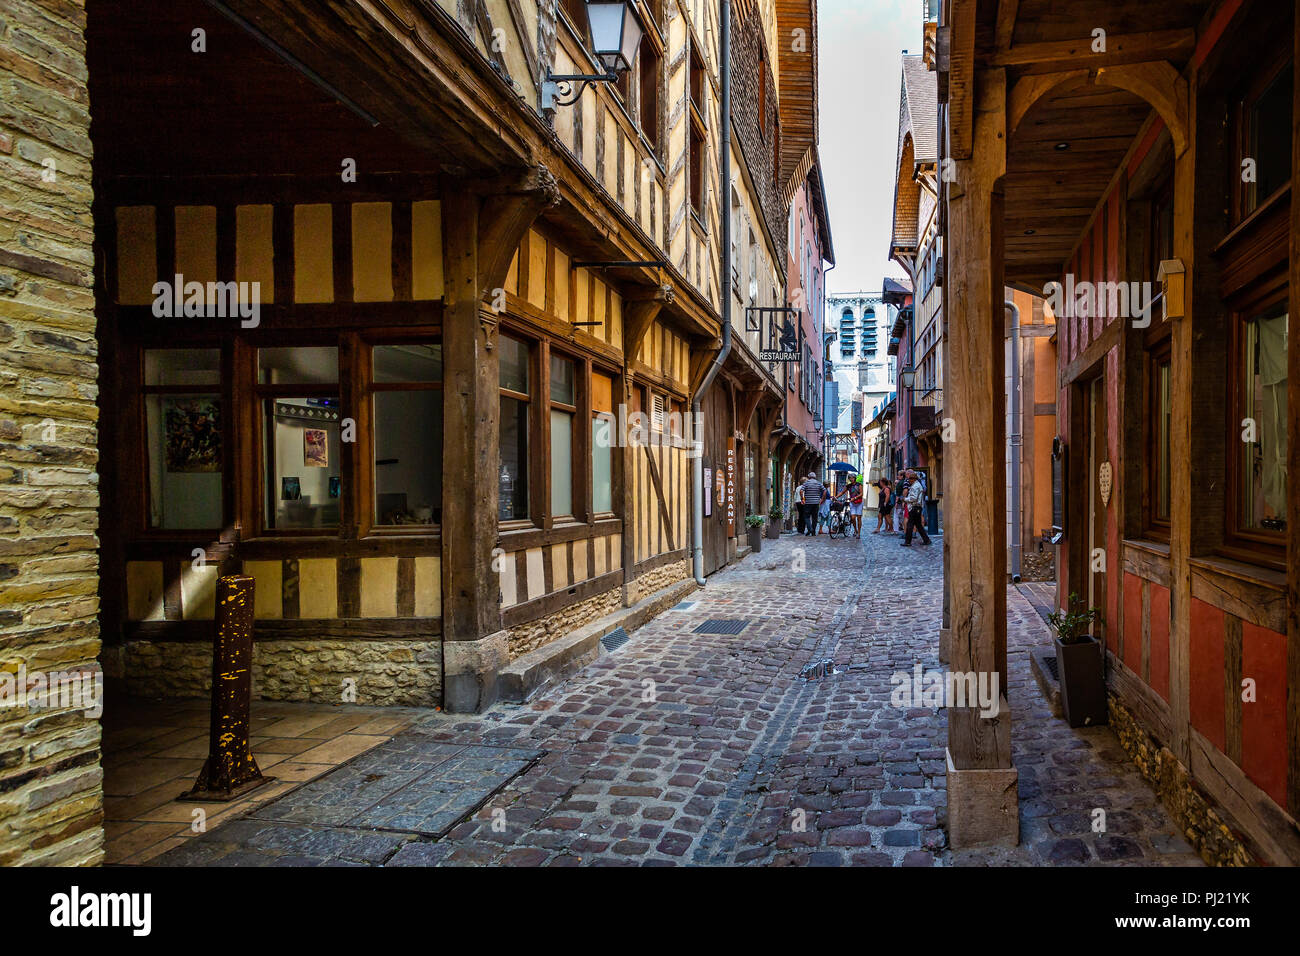 Alley of Cats in historic centre of Troyes with half timbered buildings in Troyes, Aube, France on 31 August 2018 Stock Photo